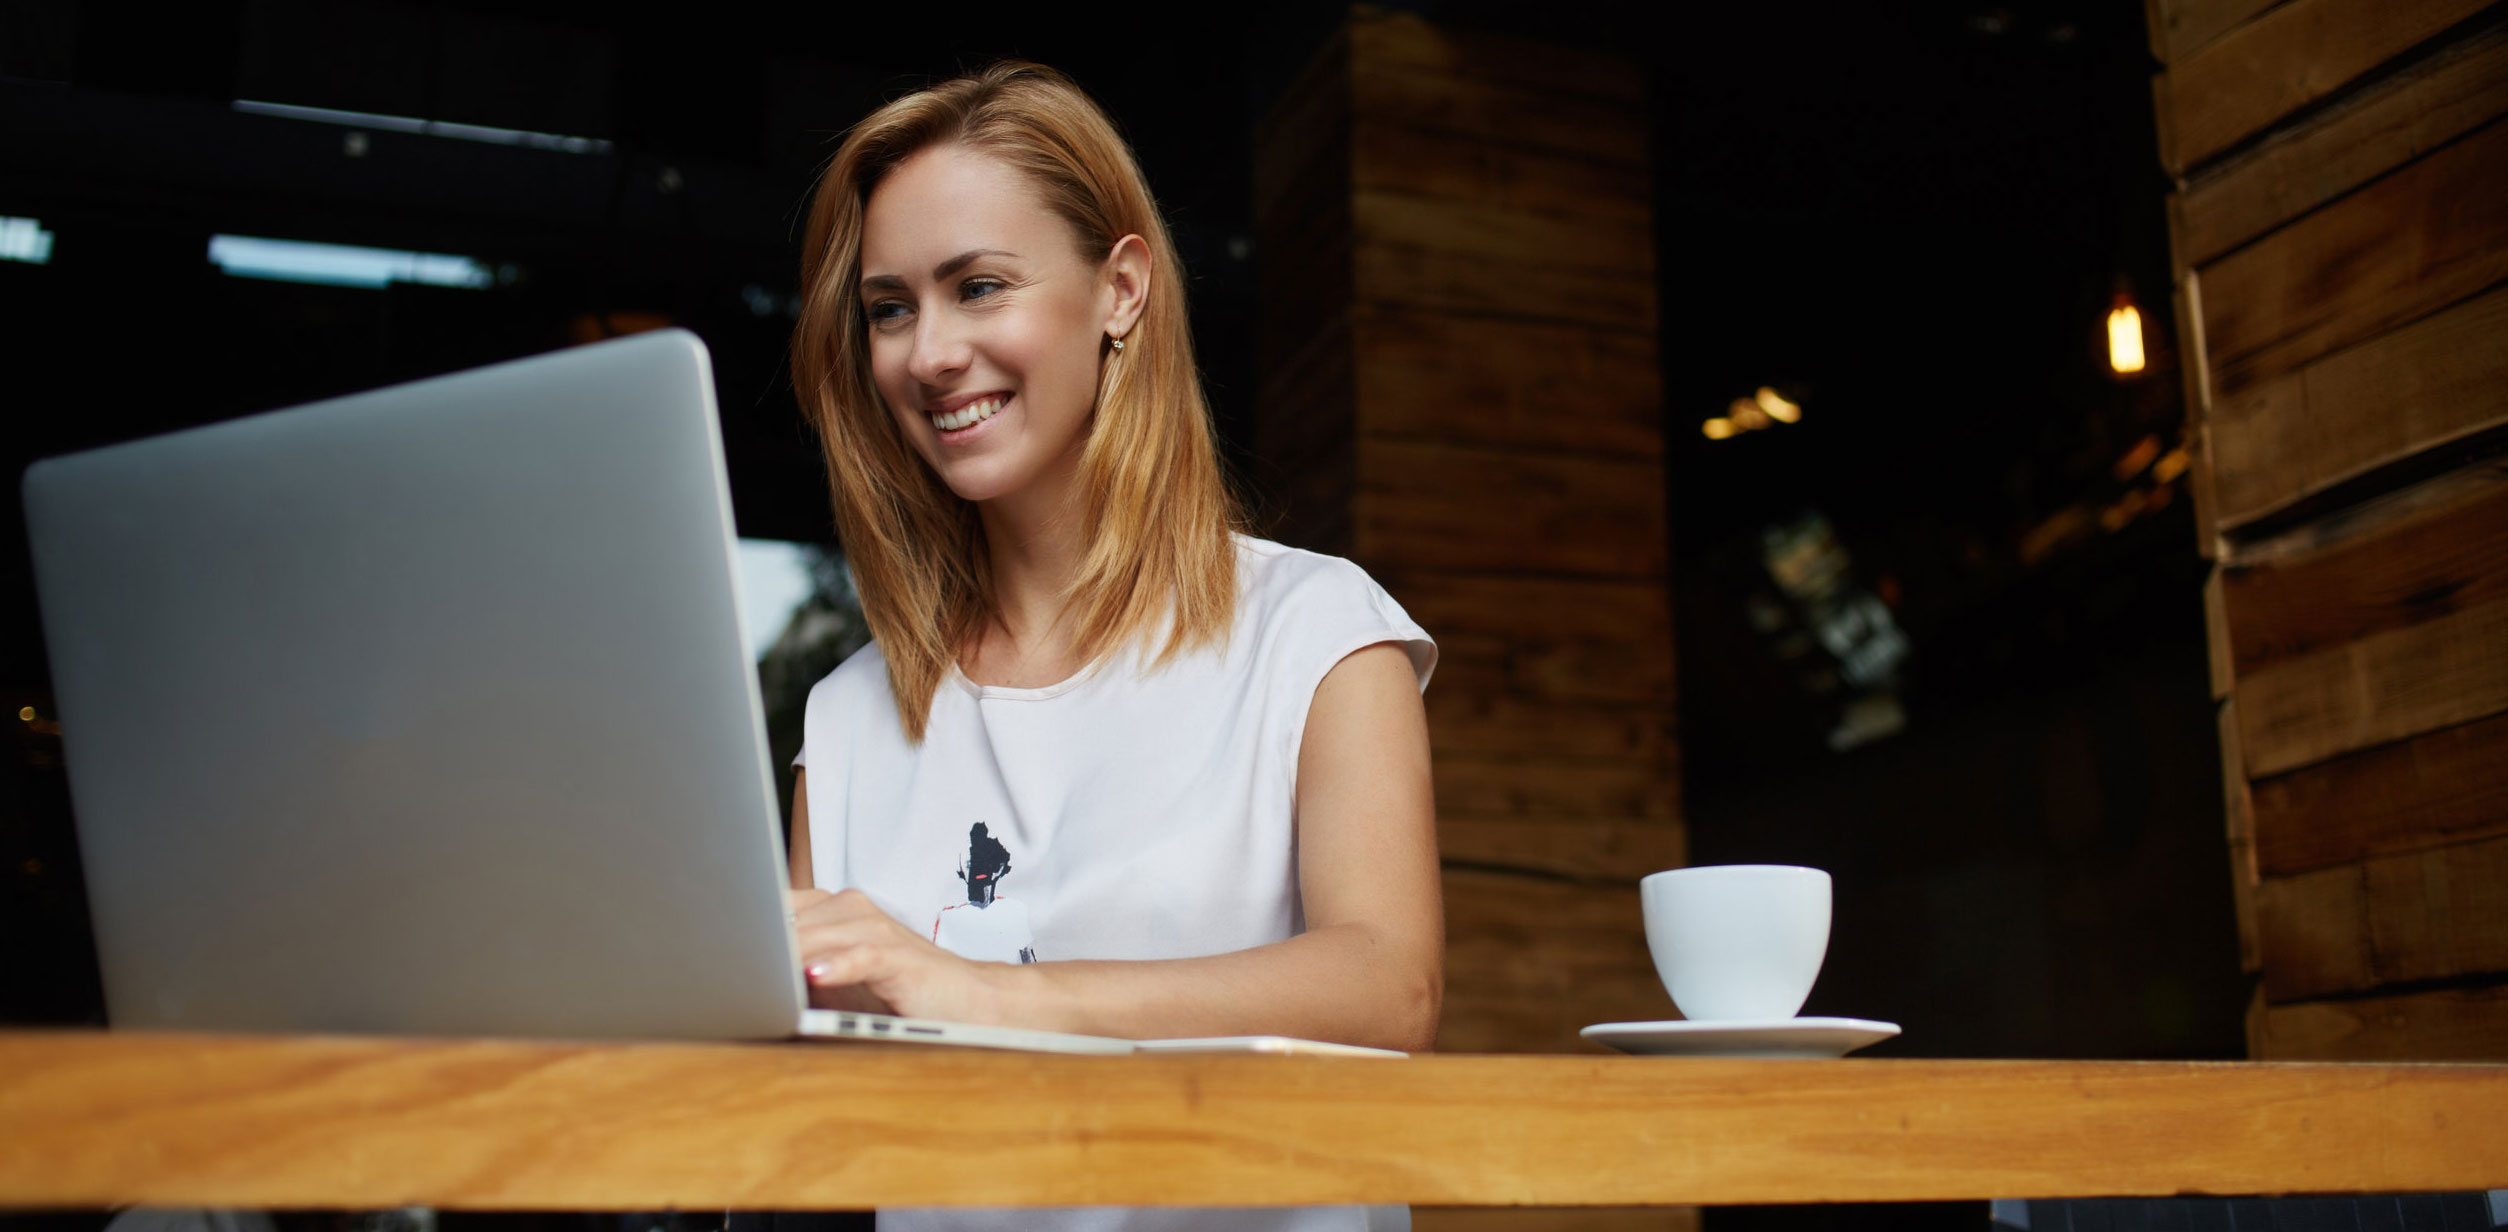 Young Woman Smiling While Working on Laptop